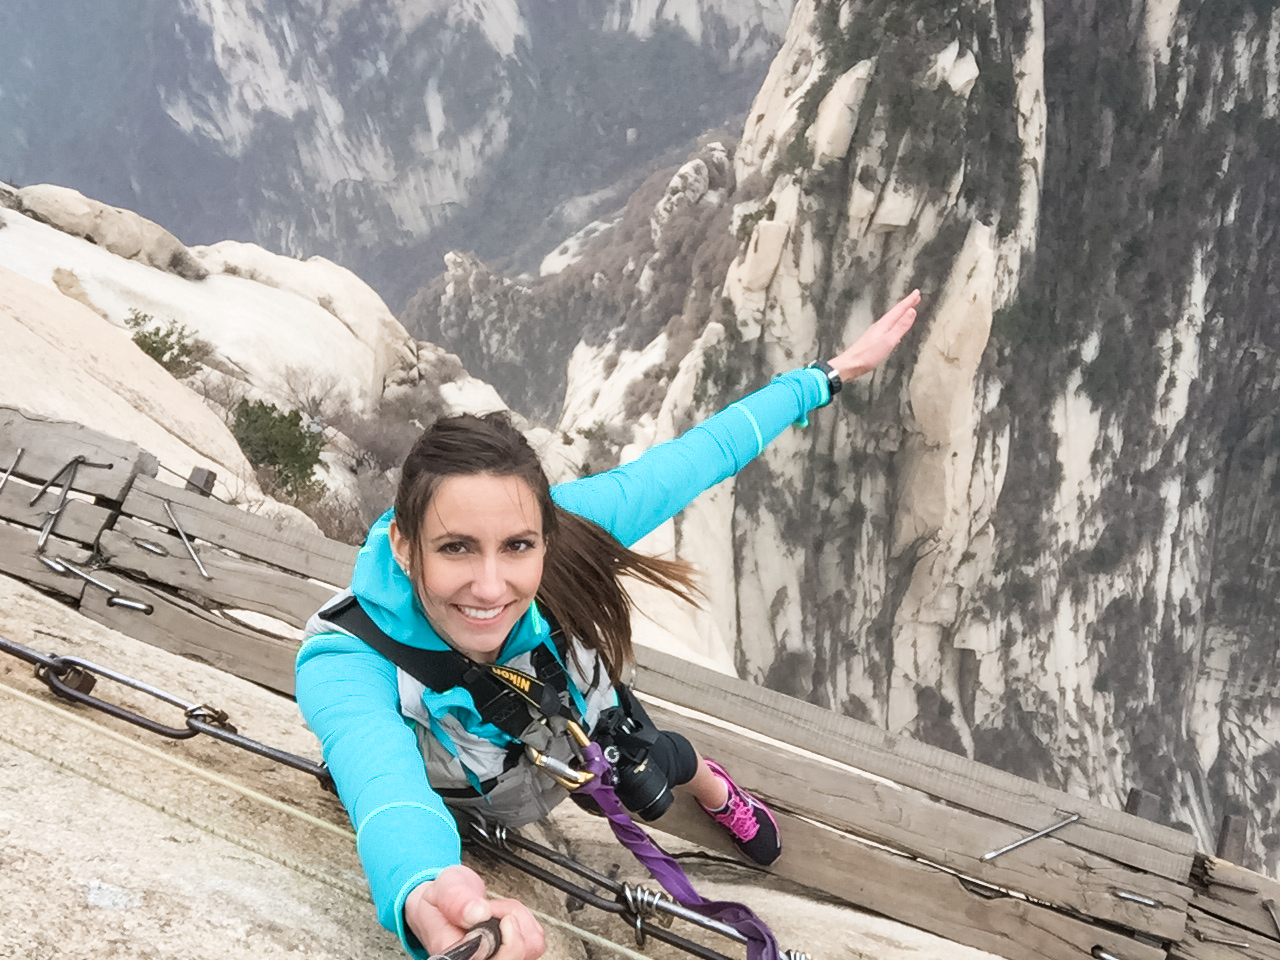 Mount Huashan's infamous plank walk in China.